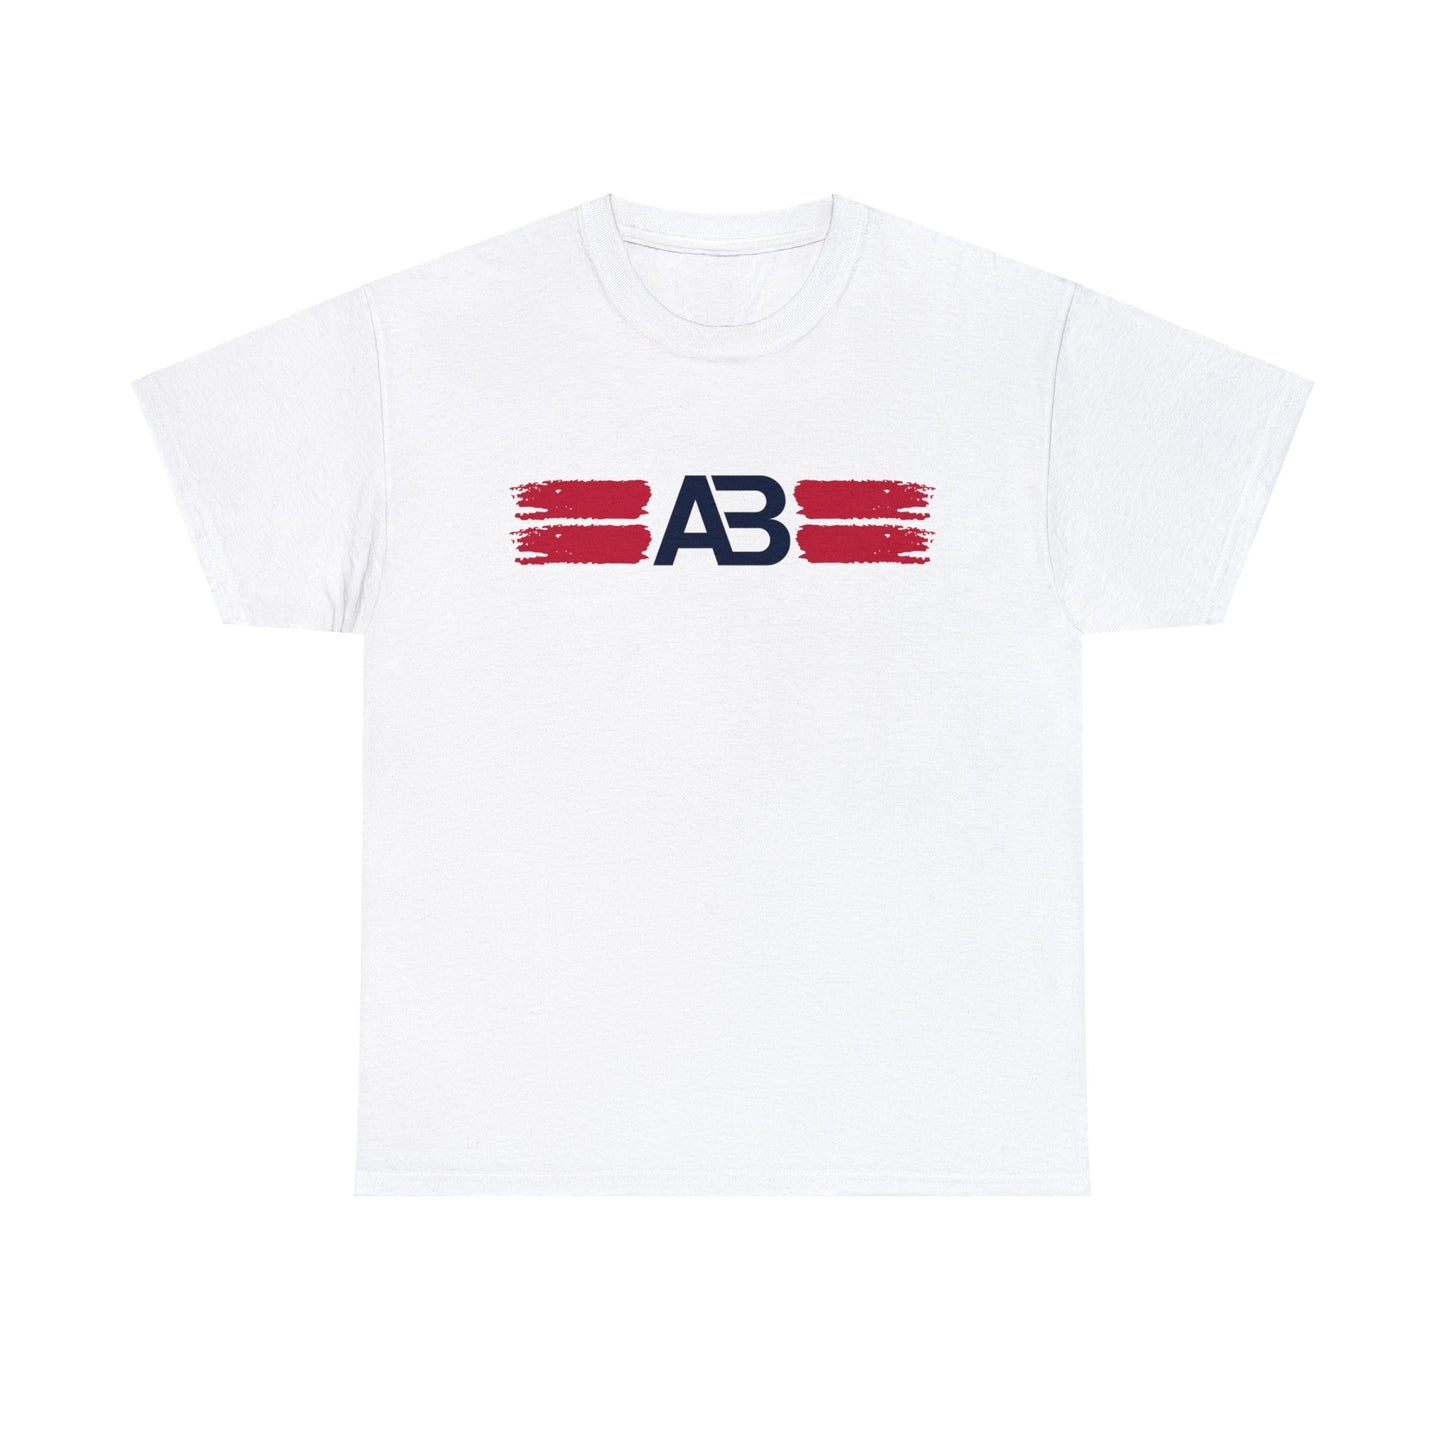 Andrew Bench Team Colors Tee